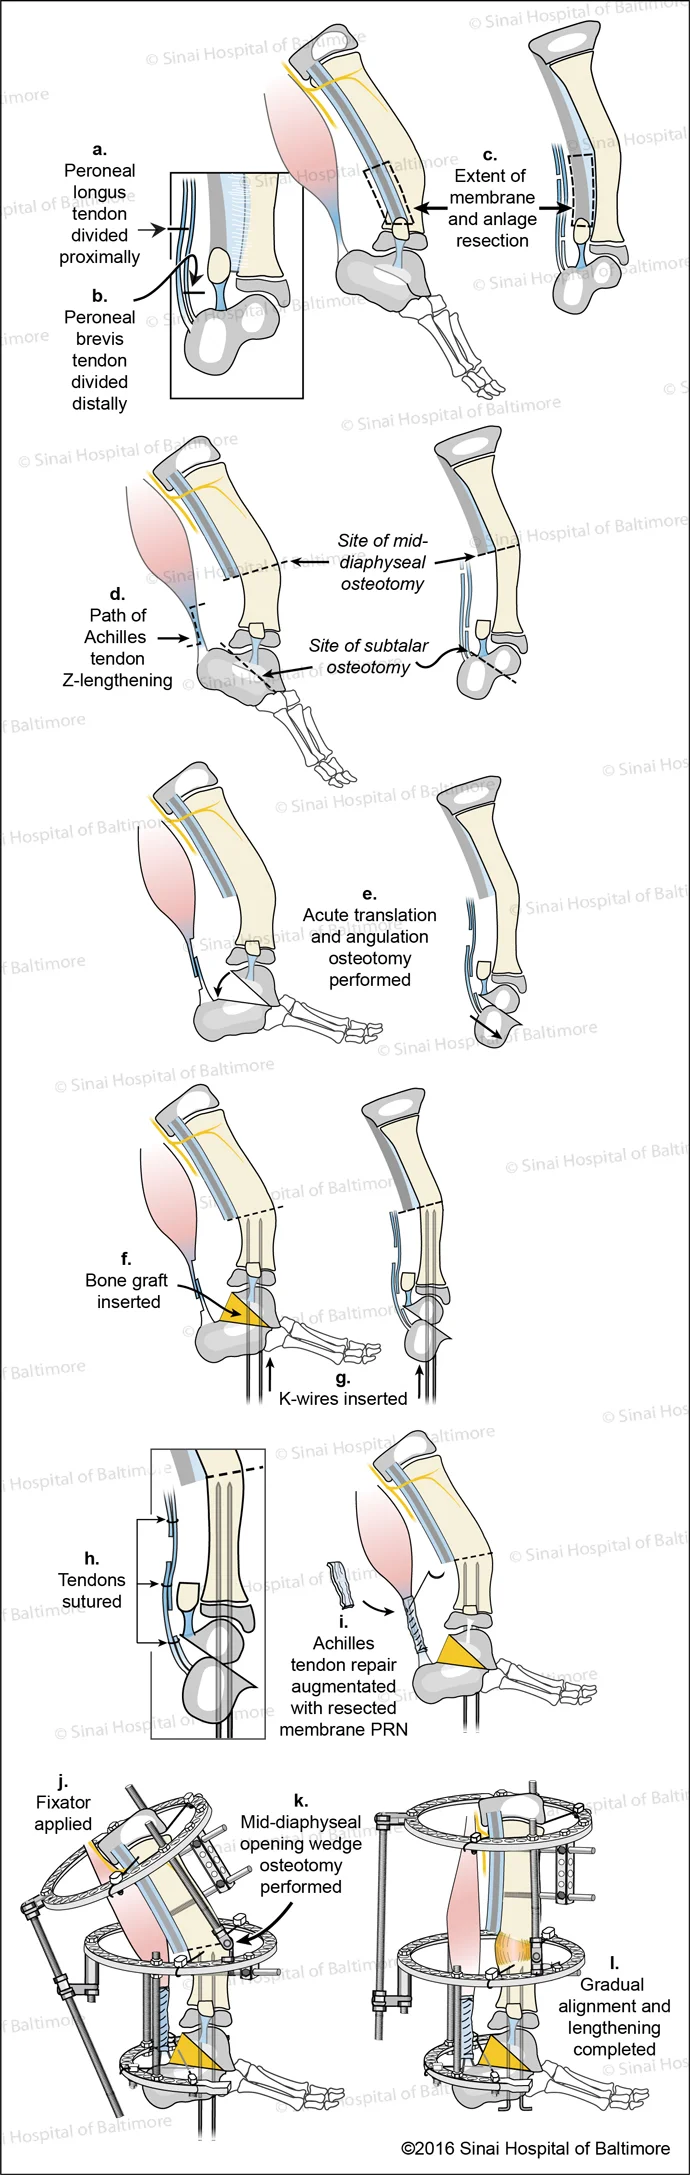 SUPERankle Surgical Technique for Subtalar Type Fibular Hemimelia (Paley Type 3B) Fig. A, Peroneal longus tendon is divided proximally. B, Peroneal brevis tendon is divided distally. C, The extent of the membrane and anlage resection is identified. D, The path of the Achilles tendon Z-lengthening and site of mid-diaphyseal and subtalar osteotomies are identified. E, Acute translation and angulation osteotomy are performed. F, Bone graft is inserted; G, K-wires are inserted; H, Tendons are sutured; I, Achilles tendon repair is augmented with resected membrane as needed; J, The external fixator is applied; K, A mid-diaphyseal opening wedge osteotomy is performed; L, Gradual alignment and lengthening is completed.